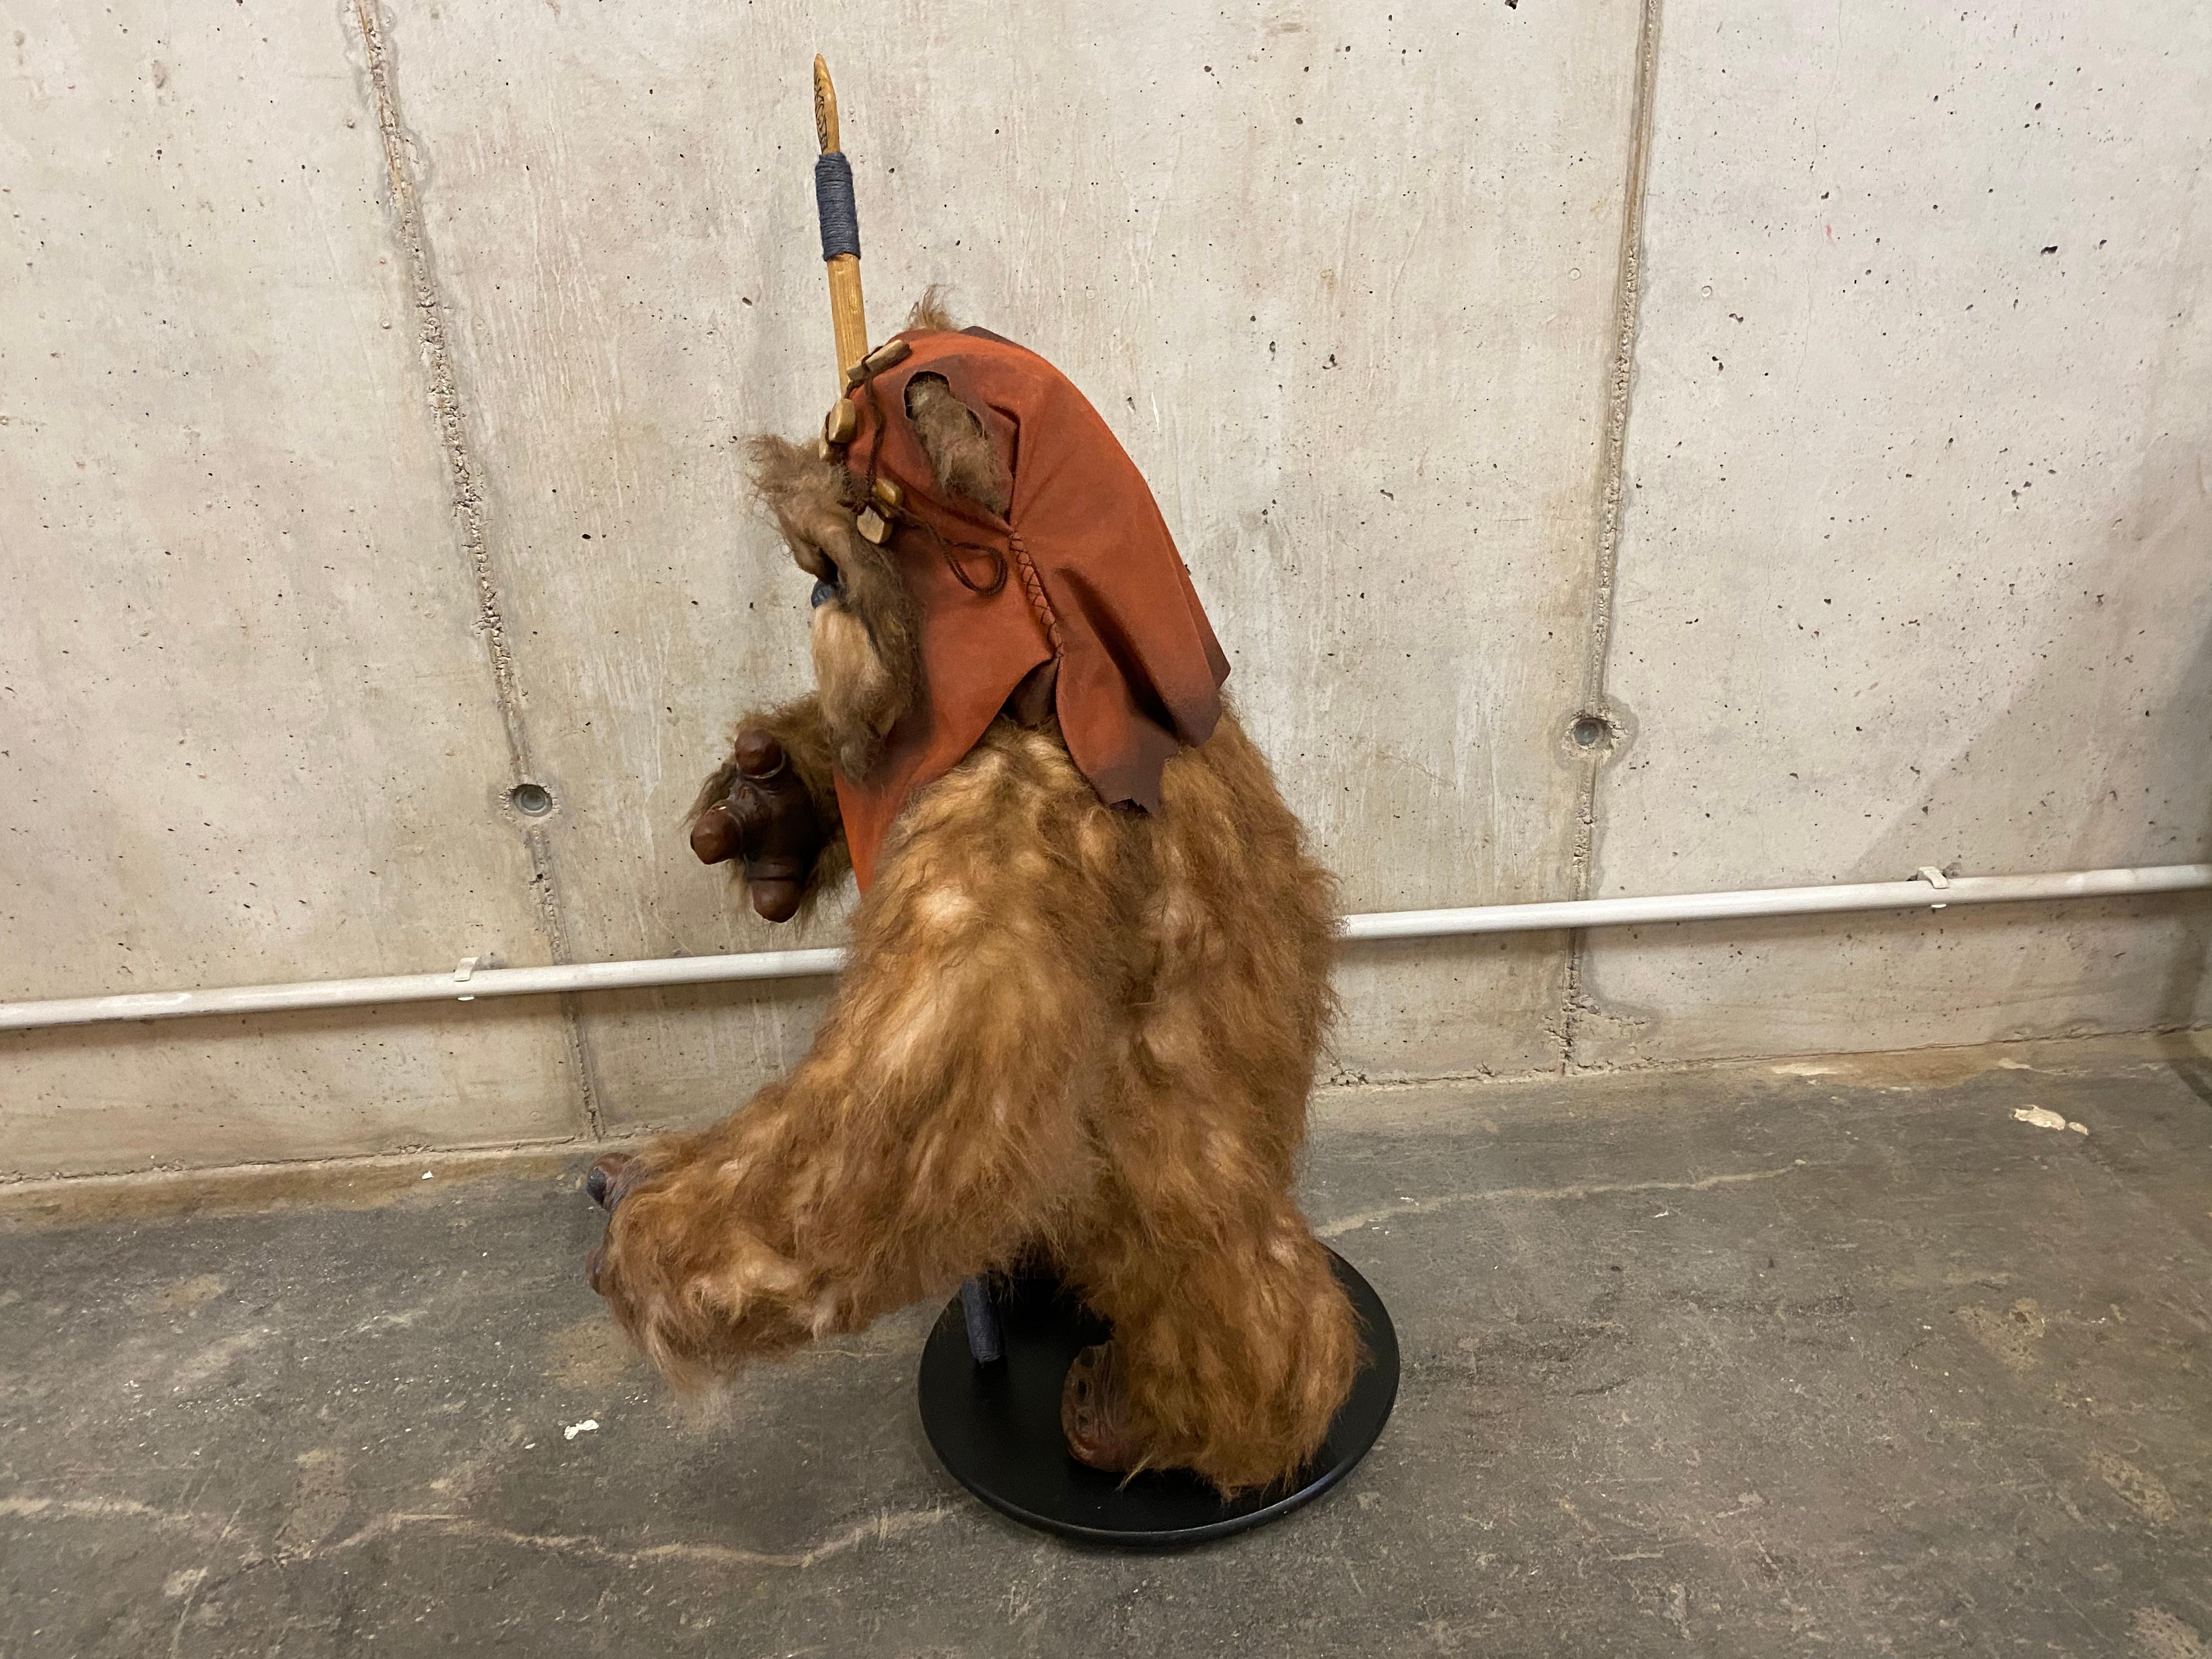 Life Size Wicket Ewok Figure, Edition of 50 Pieces, Star Wars Photo Requisite 2